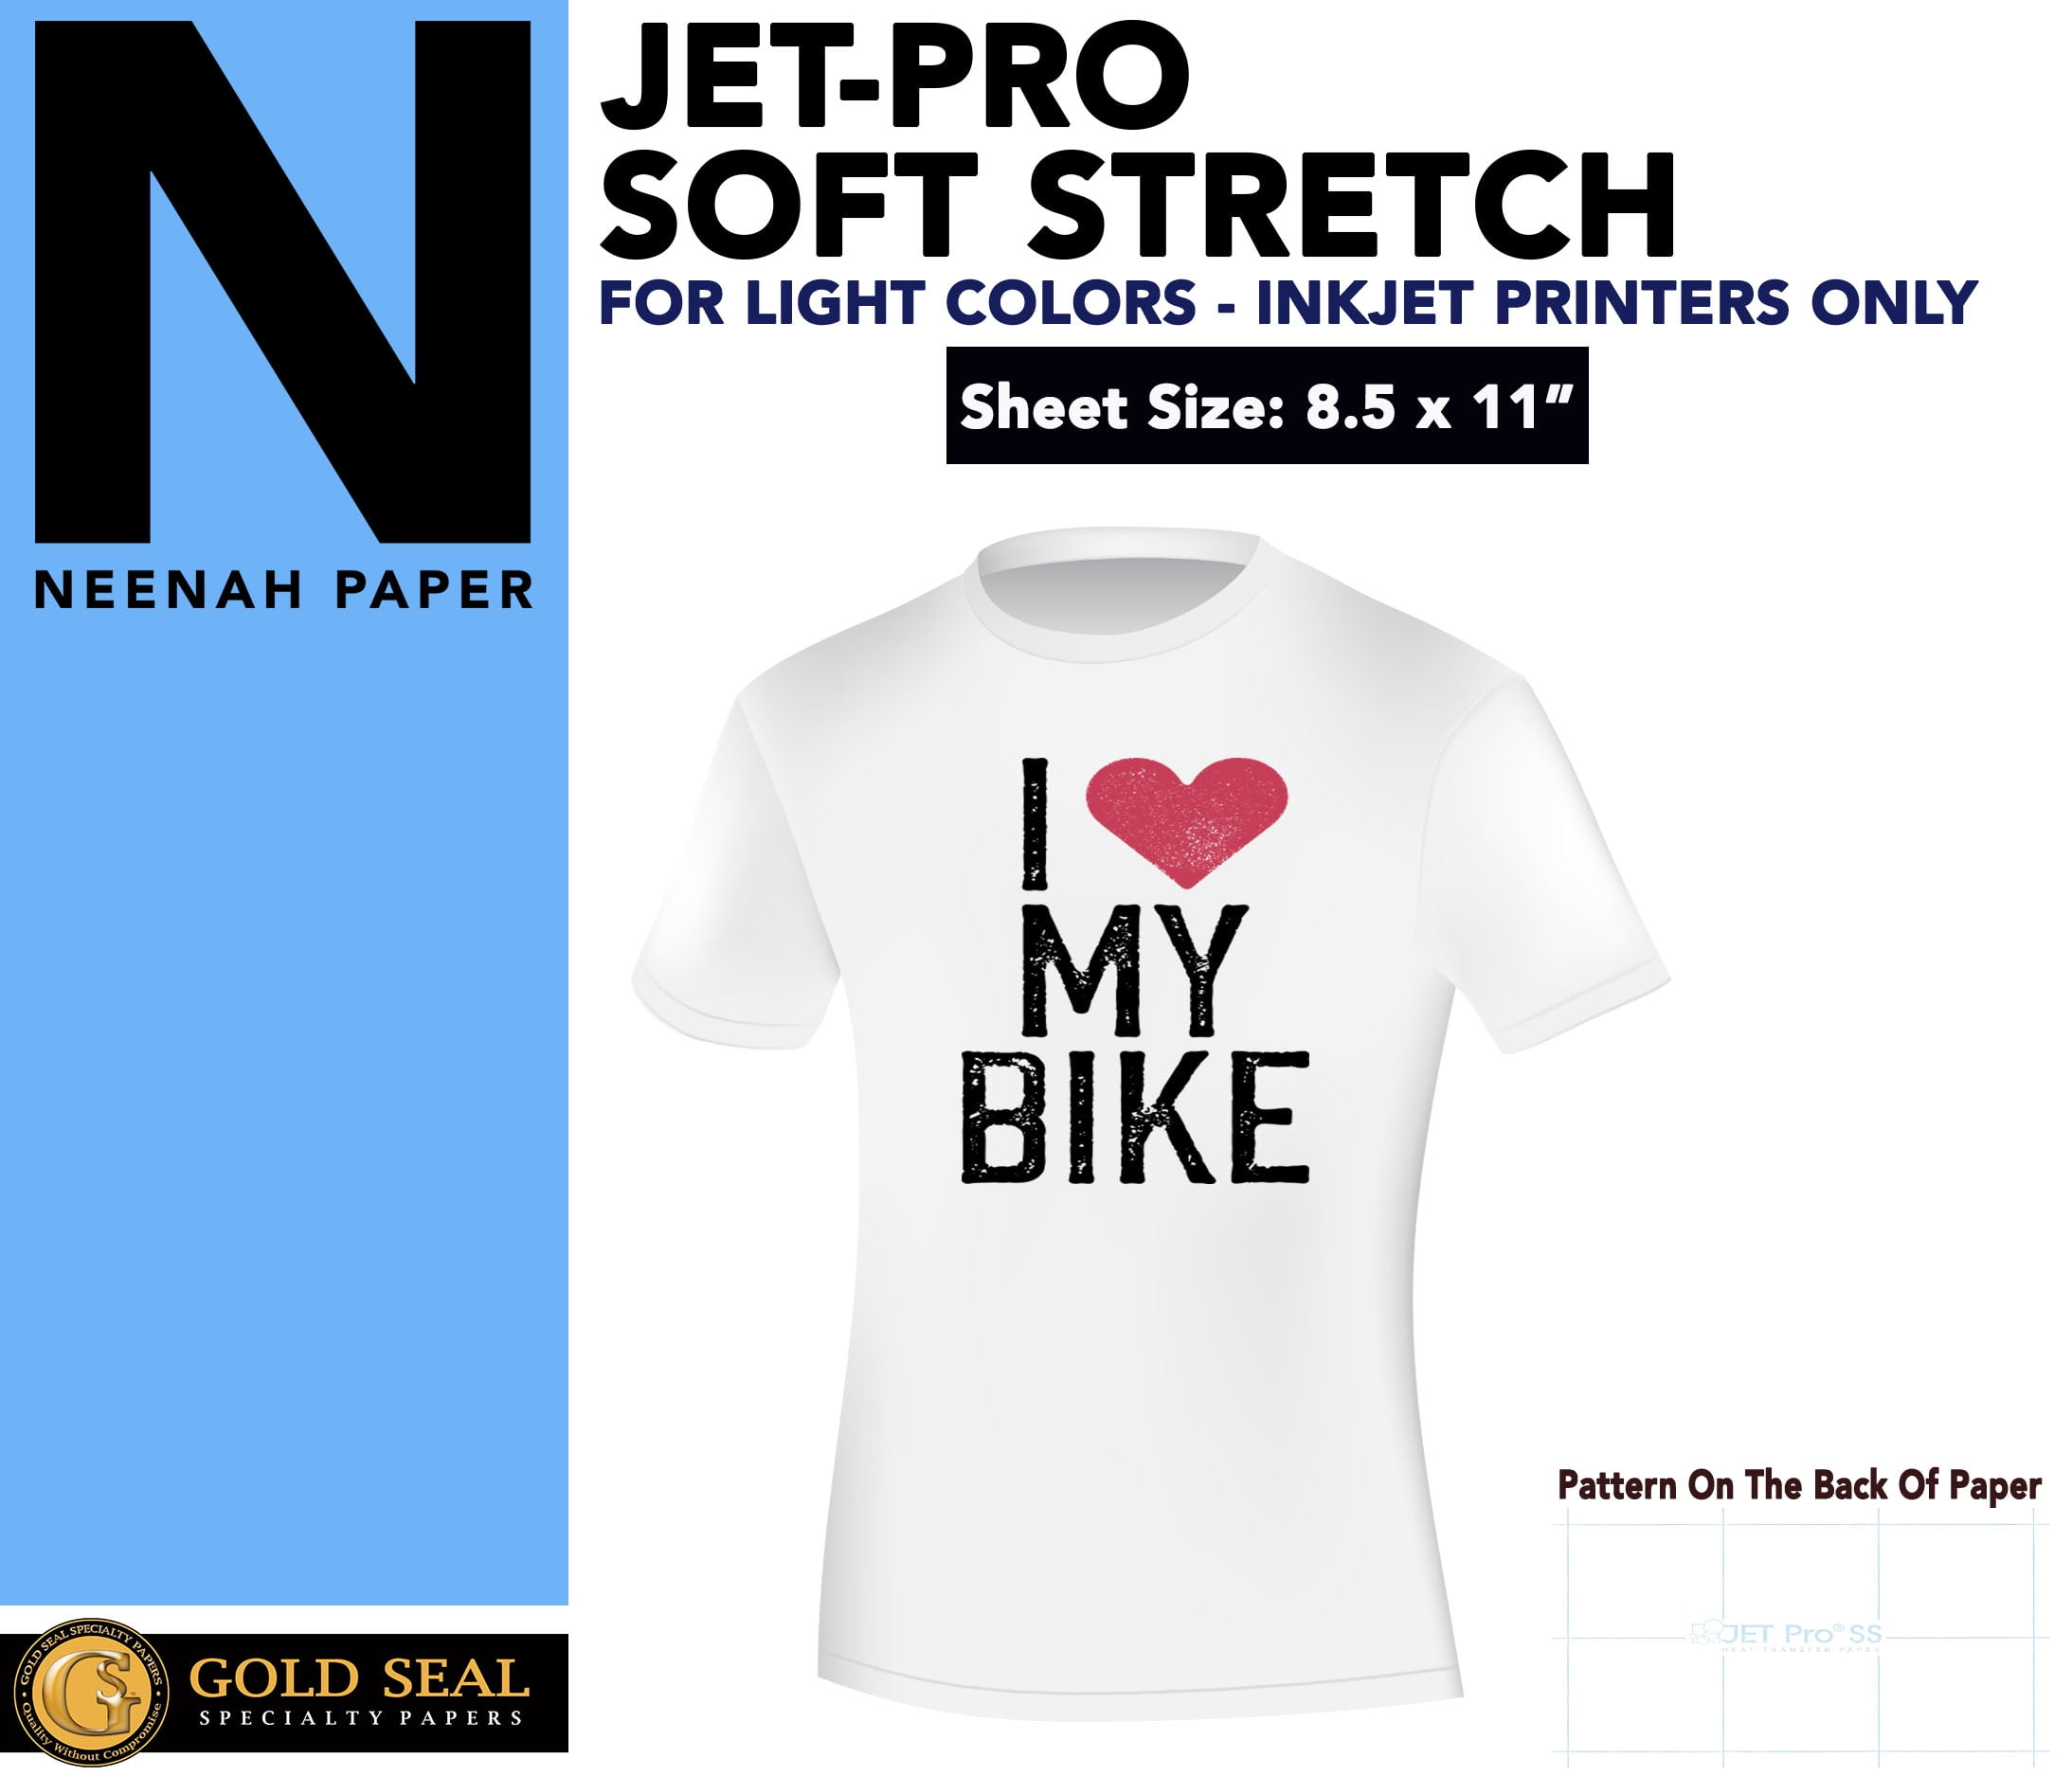 LIGHT COLORS INK JET HEAT IRON ON TRANSFER PAPER 8.5”x11” 50 Sheets FREE Deliver 